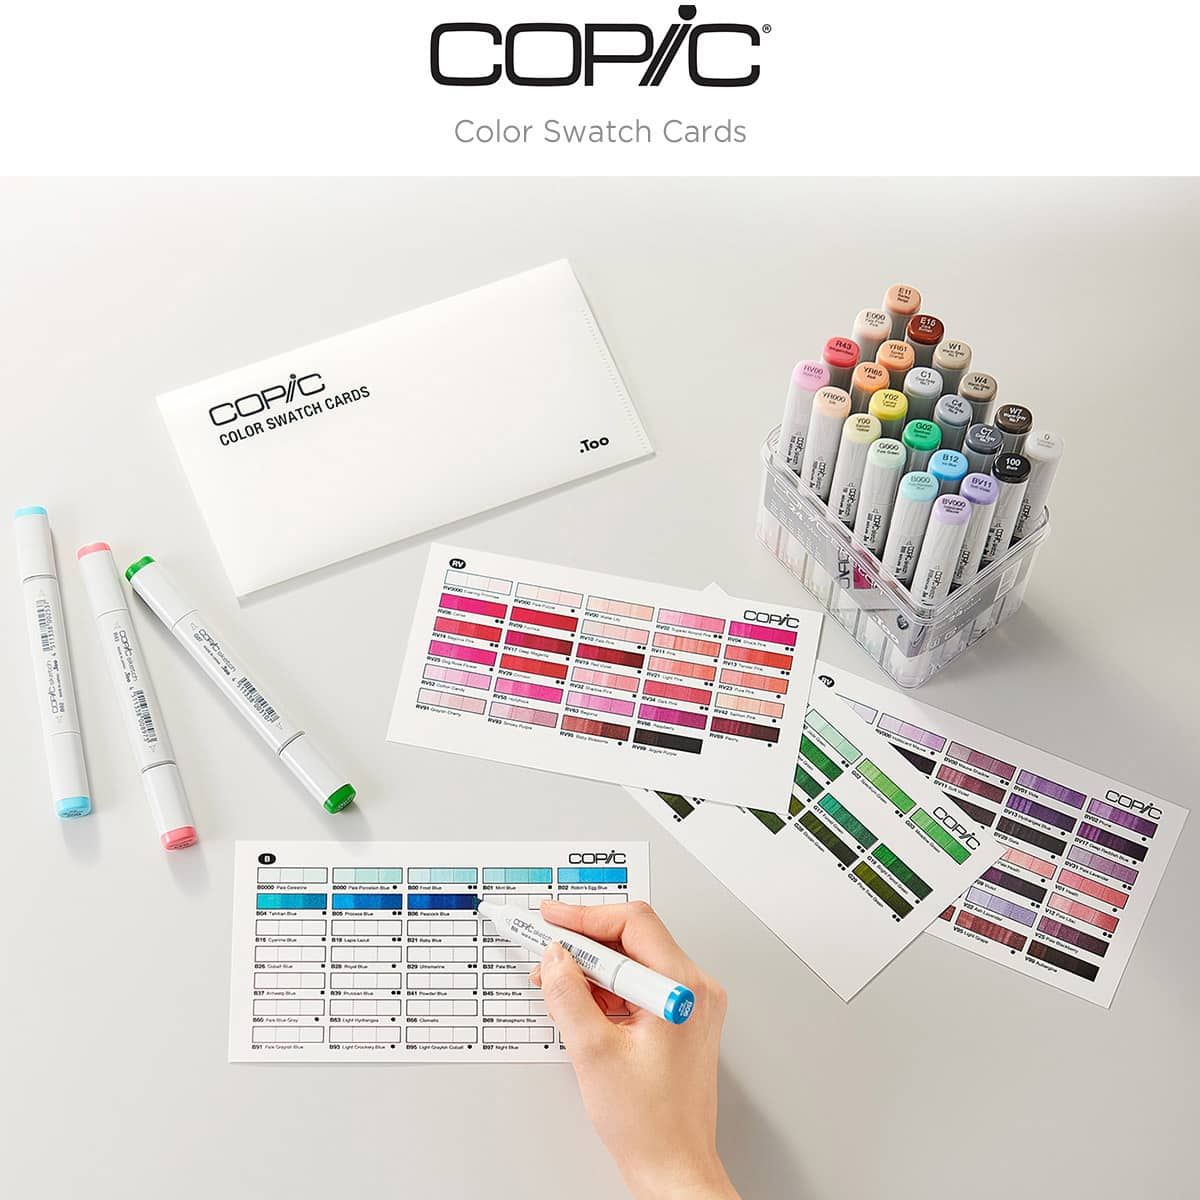 COPIC color swatch cards